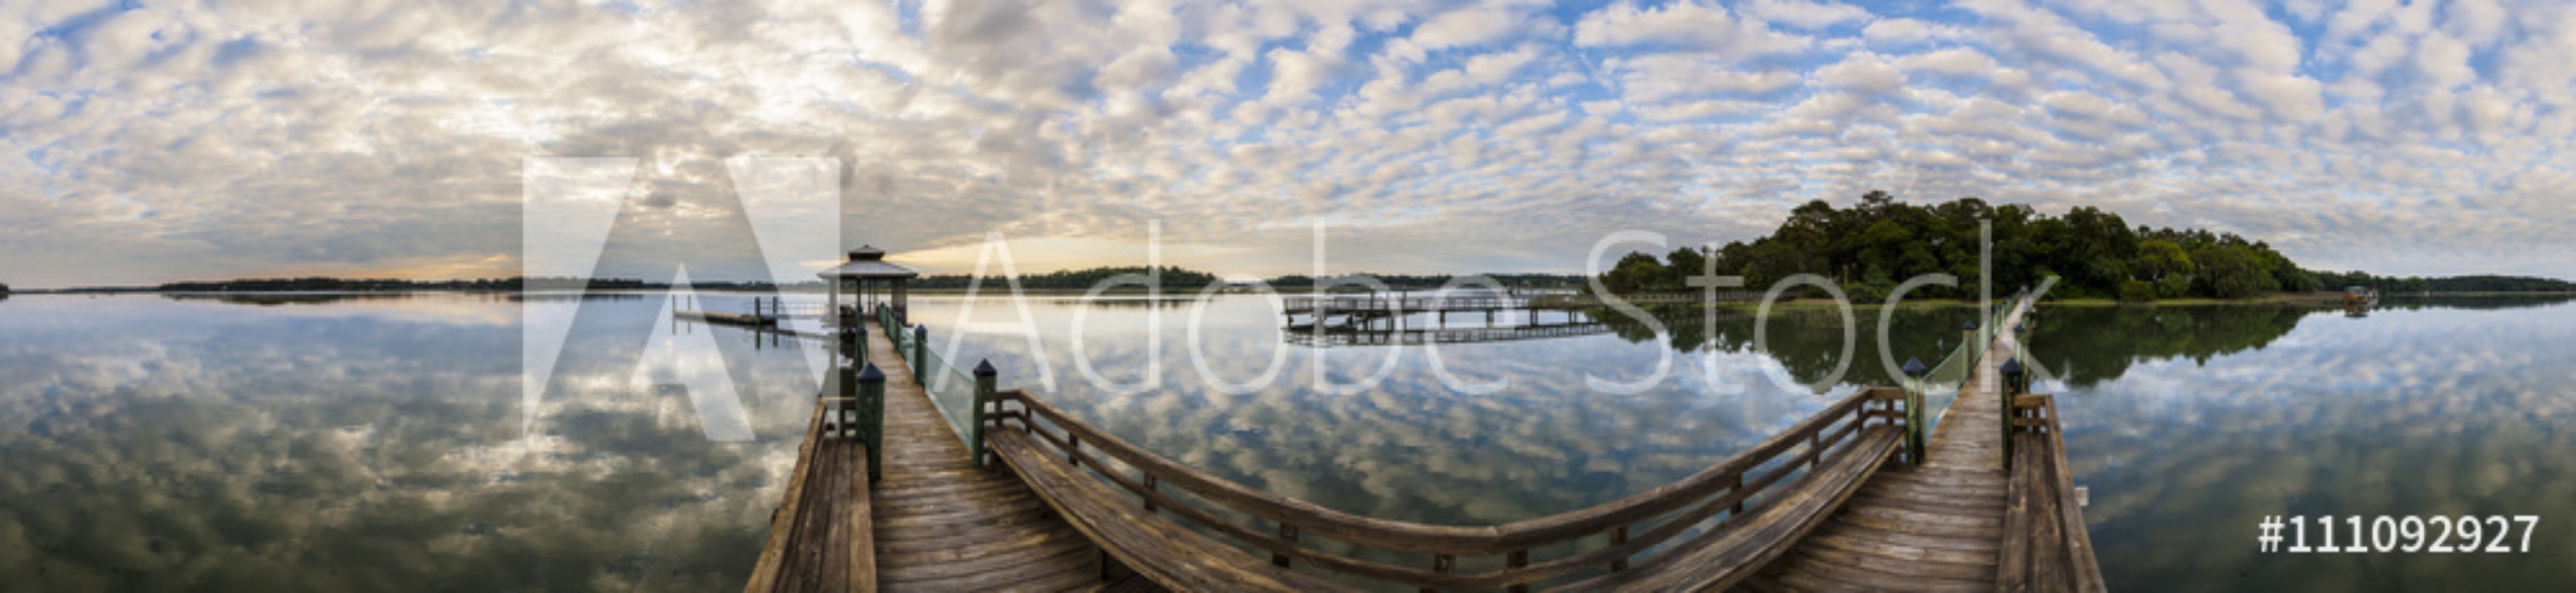 Picture of 360 panorama of South Carolina